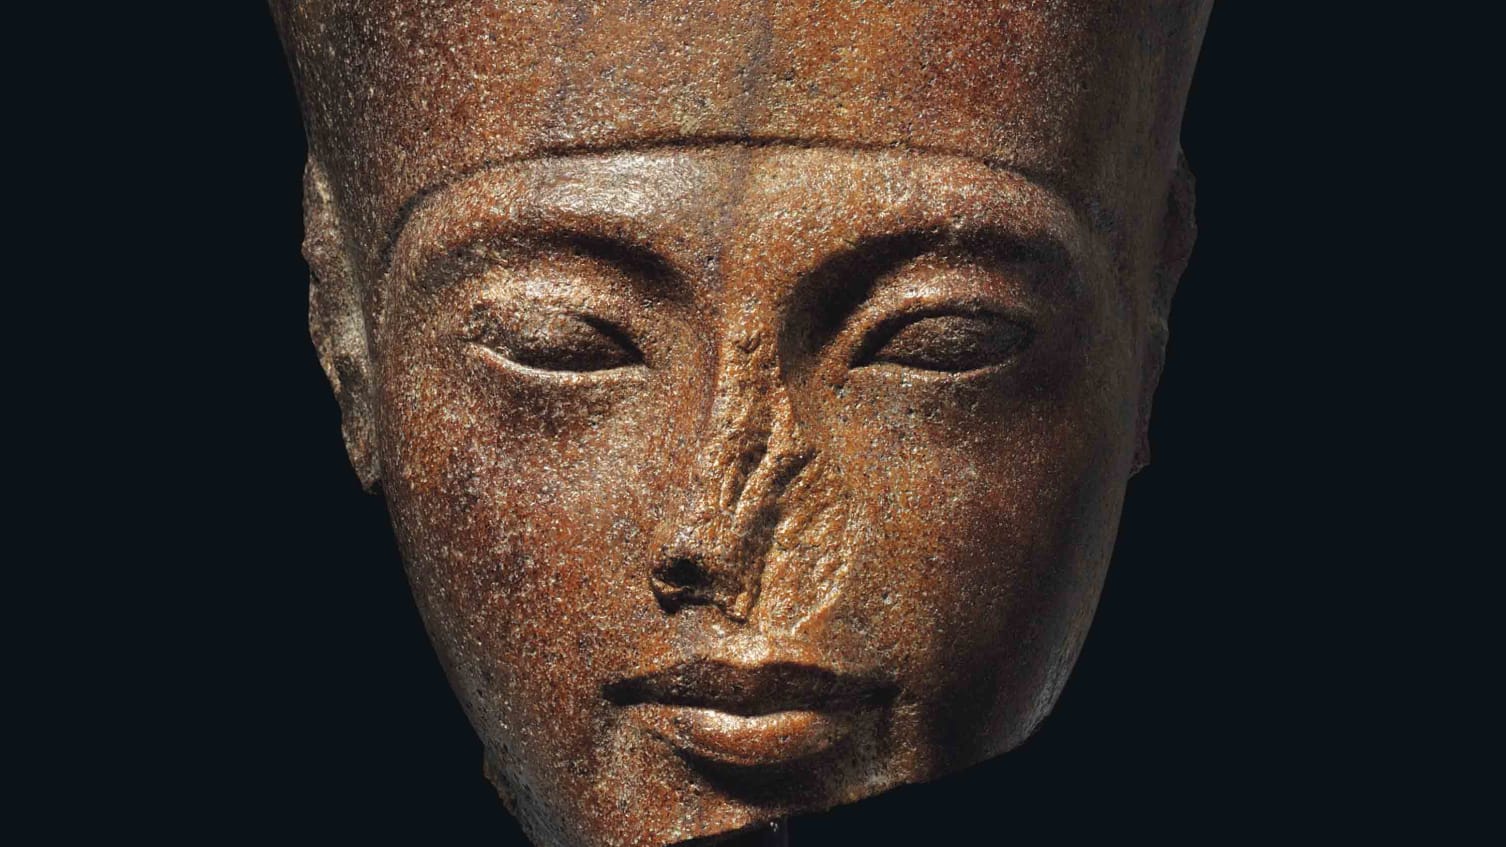 From Christies: An Egyptian brown quartzite head of Tutankhamen as the God Amen, its features reminiscent of the Pharaoh Tutankhamen, a device used to align the ruling King with deities, will lead The Exceptional Sale in London on 4th July. The head which has been well published and exhibited in the last 30 years, is expected to realise over Â£4million.